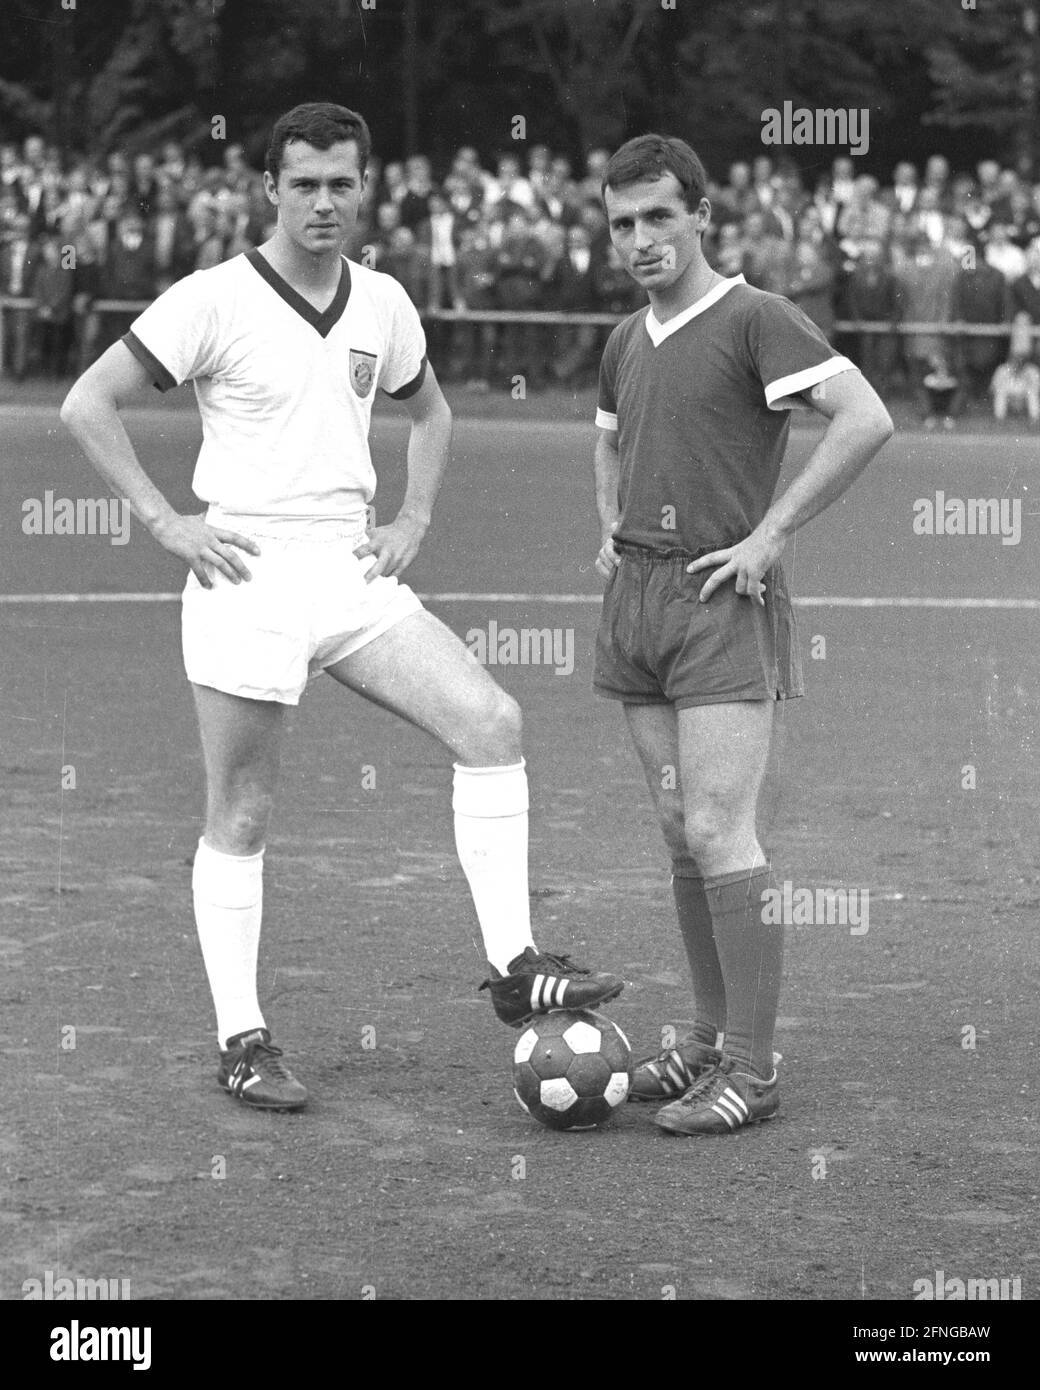 Franz Beckenbauer (FC Bayern Munich) with his brother Walter Beckenbauer (left) at a friendly match 22.08.1966 (date estimated) [automated translation] Stock Photo